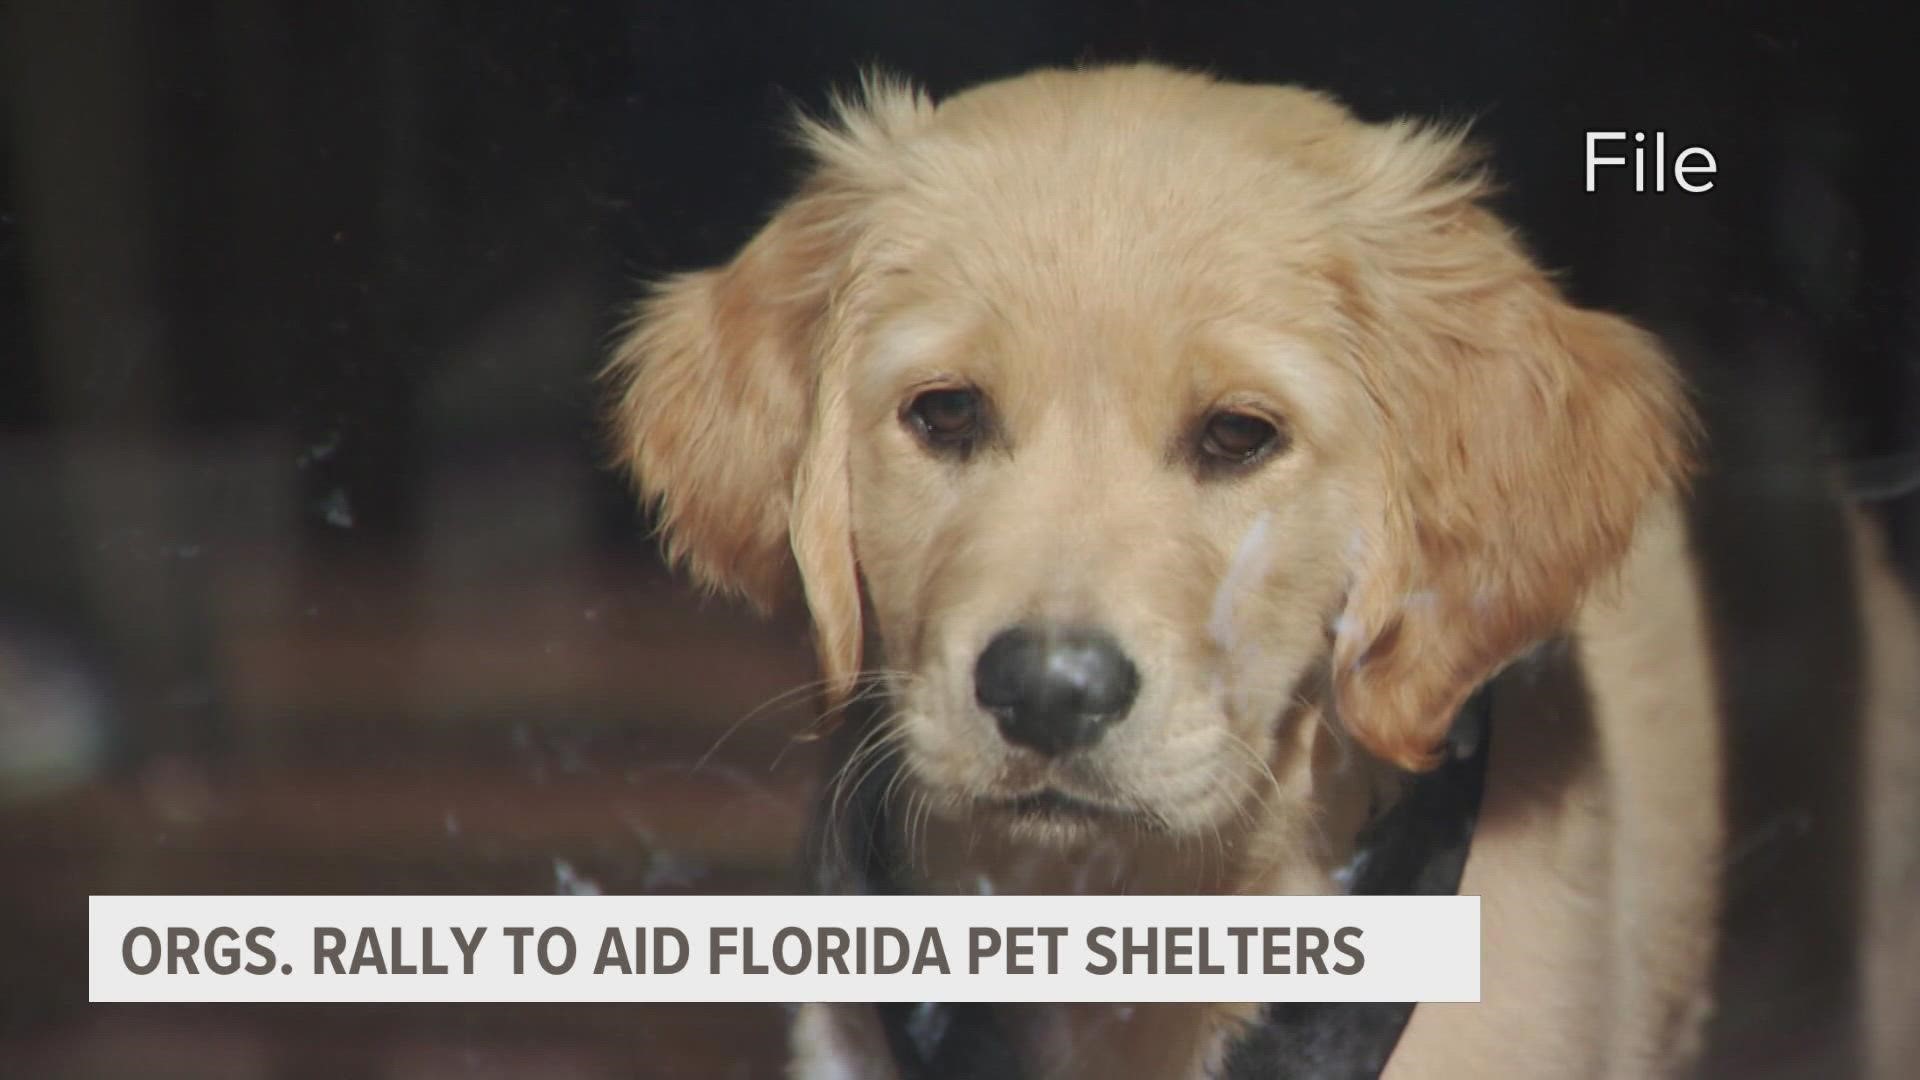 While damage reports are still coming in from Florida Hurricane Ian, there is another effort underway to rescue our furry friends.